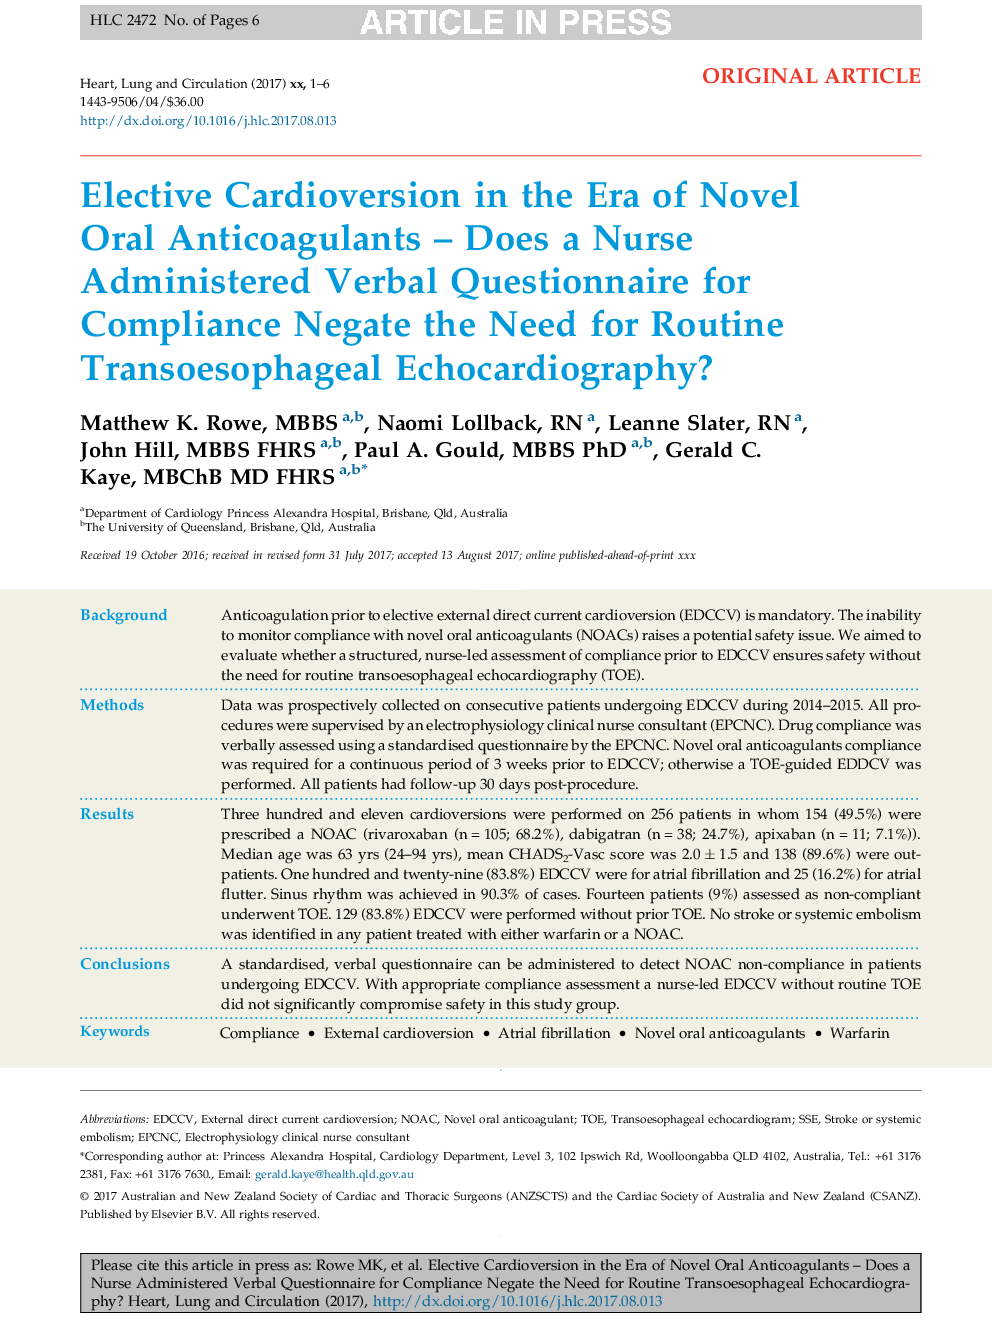 Elective Cardioversion in the Era of Novel Oral Anticoagulants - Does a Nurse Administered Verbal Questionnaire for Compliance Negate the Need for Routine Transoesophageal Echocardiography?